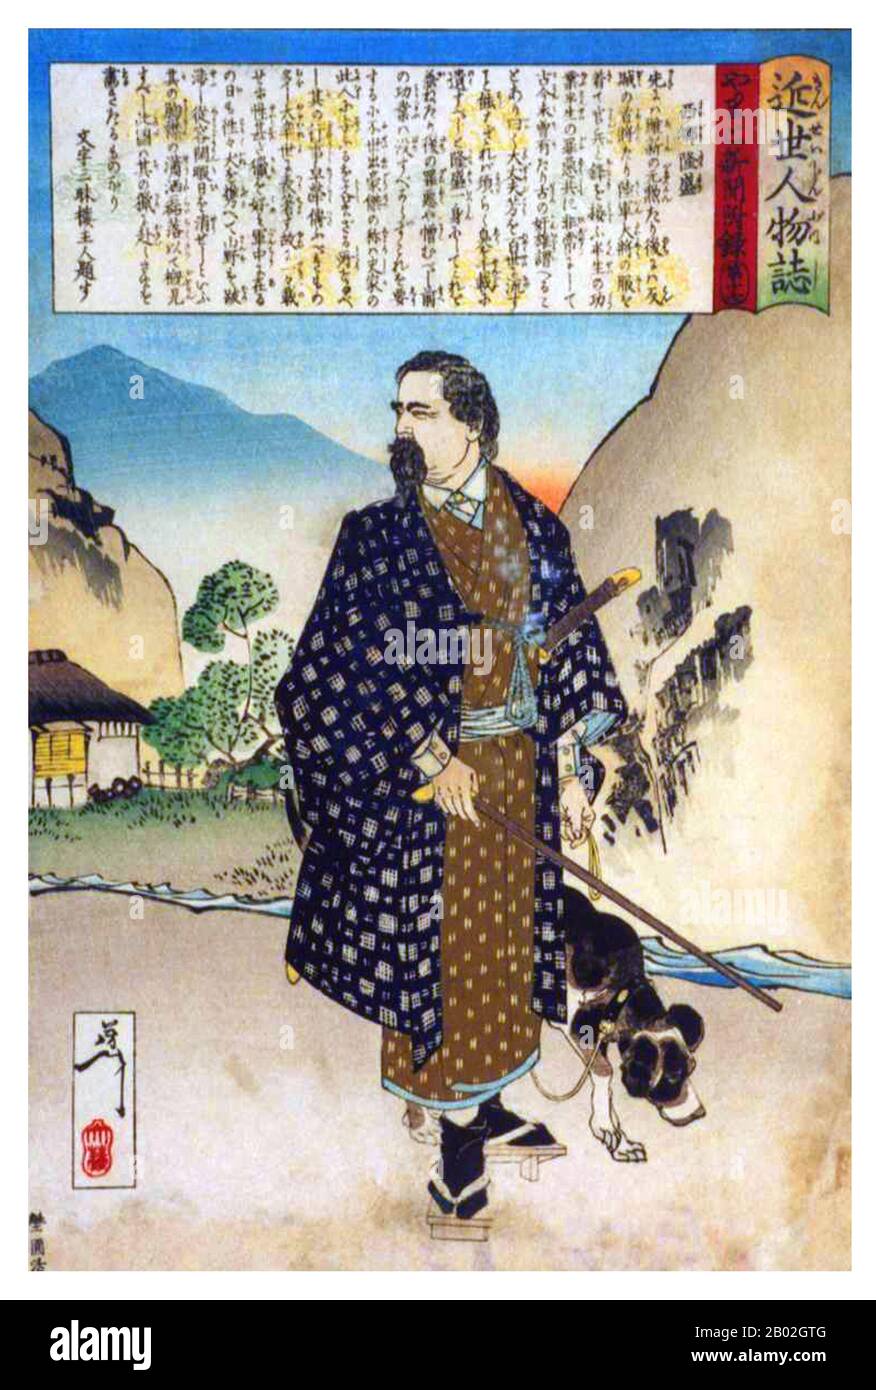 Saigō Takamori, original name Kichibe or Kichinosuke, literary name Nanshu, was one of the most influential samurai in Japanese history. He lived during the late Edo Period and early Meiji Era, and became a leader of the Meiji restoration.  In 1867, Saigo’s troops supported the Emperor in the Meiji Restoration; with Katsu Kaishu, who was the representative of the Shogunate government, he achieved the bloodless surrender of Edo Castle and successfully conducted the coup d’etat of 'Osei Fukko' (Restoration of Imperial rule). He was later put in command of over 50,000 samurai, a large segment of Stock Photo